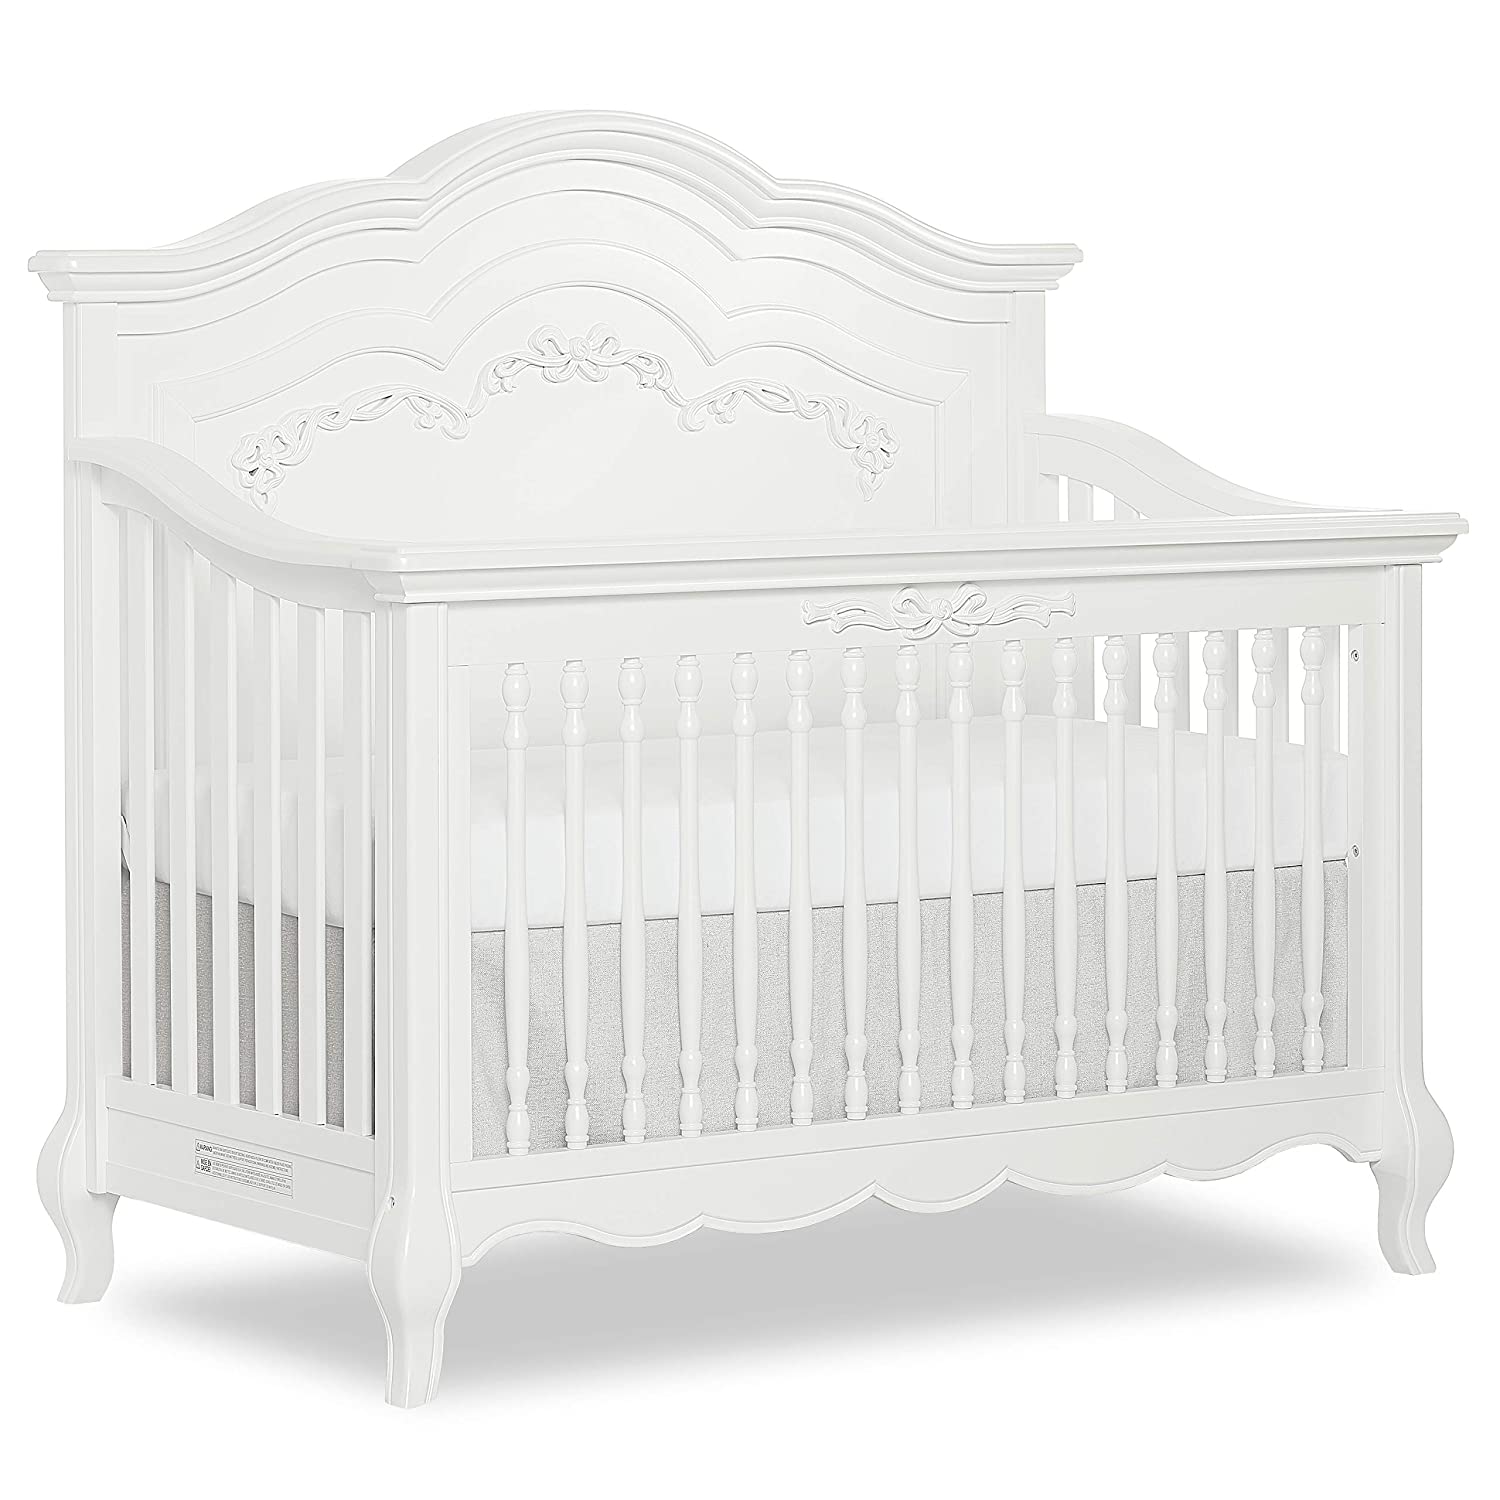 Evolur Aurora 5-in-1 Convertible Crib in Frost, Greenguard Gold Certified, Features 3 Mattress Height Settings, Sturdy and Spacious Baby Crib, Wooden Furniture - image 1 of 11